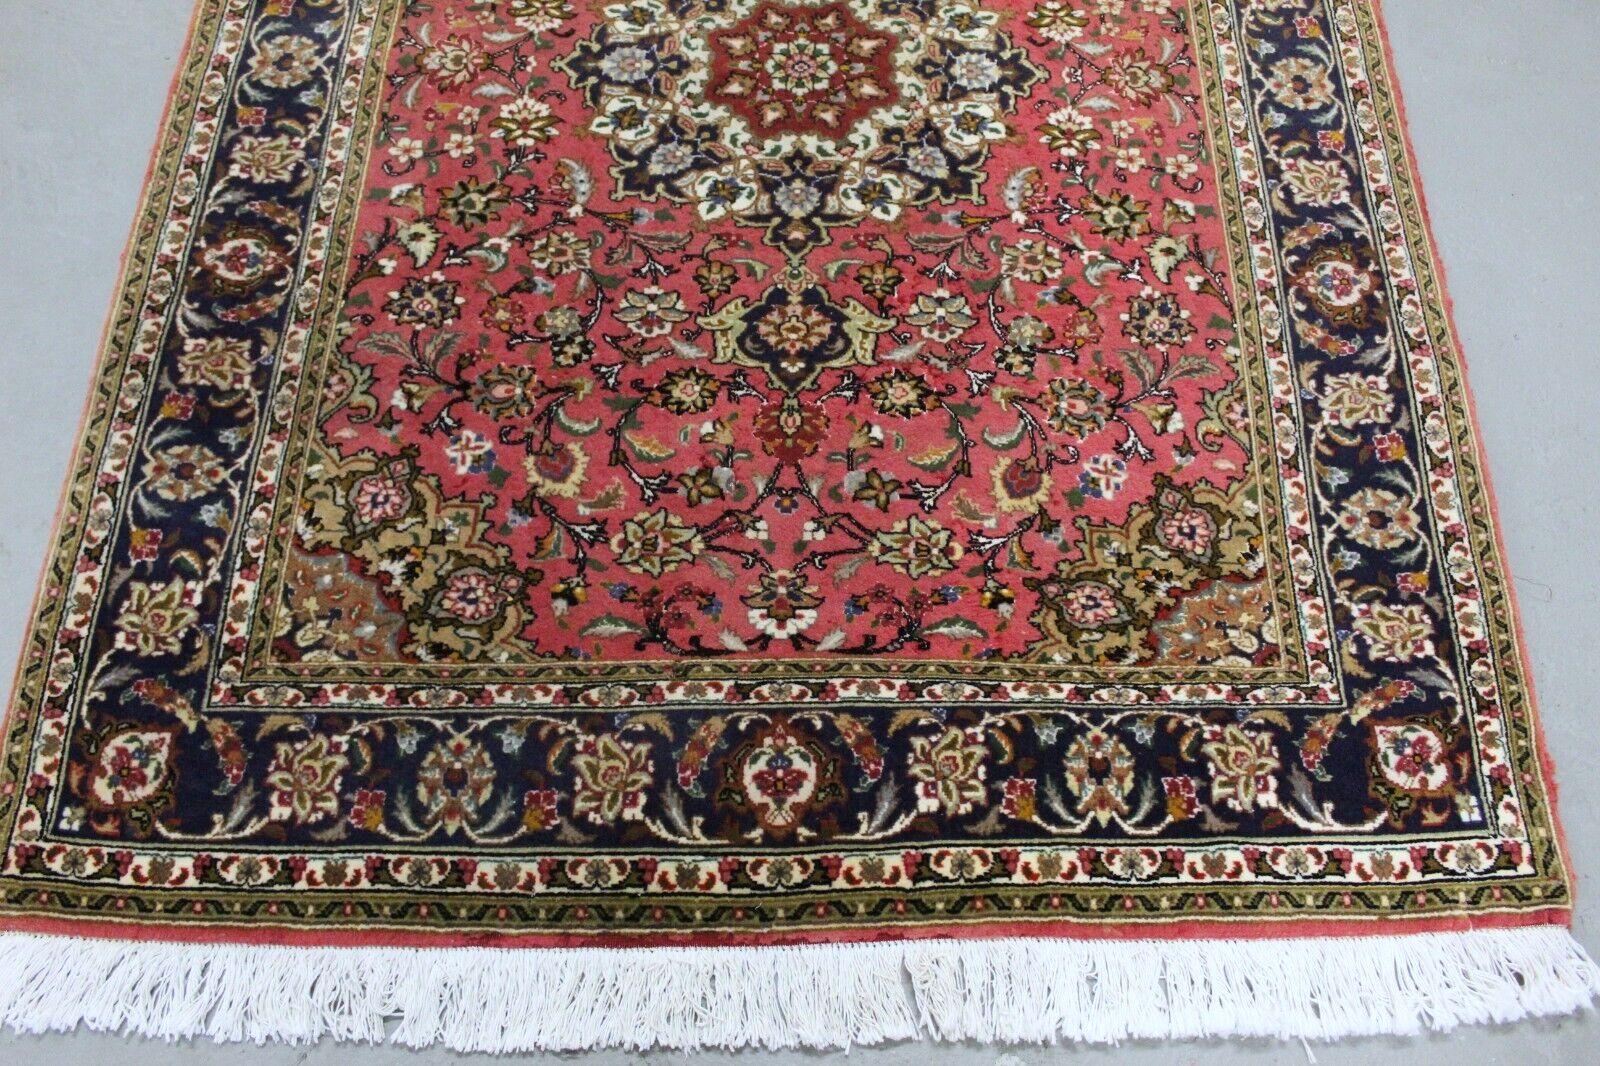 Handmade Vintage Persian Style Tabriz Rug With Silk 3.6' x 4.9', 1970s - 1K49 In Good Condition For Sale In Bordeaux, FR